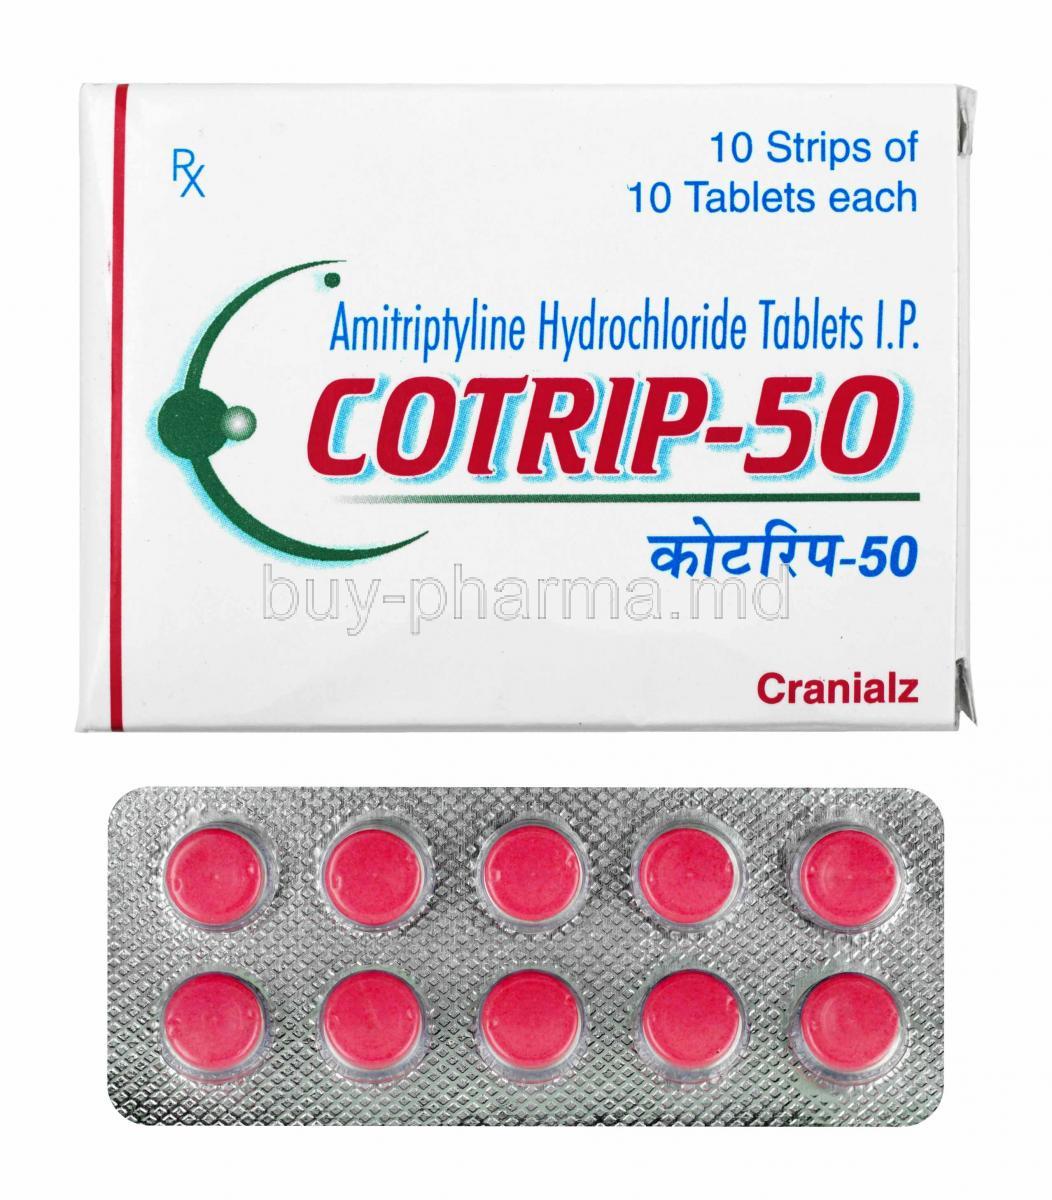 Cotrip, Amitriptyline box and tablets